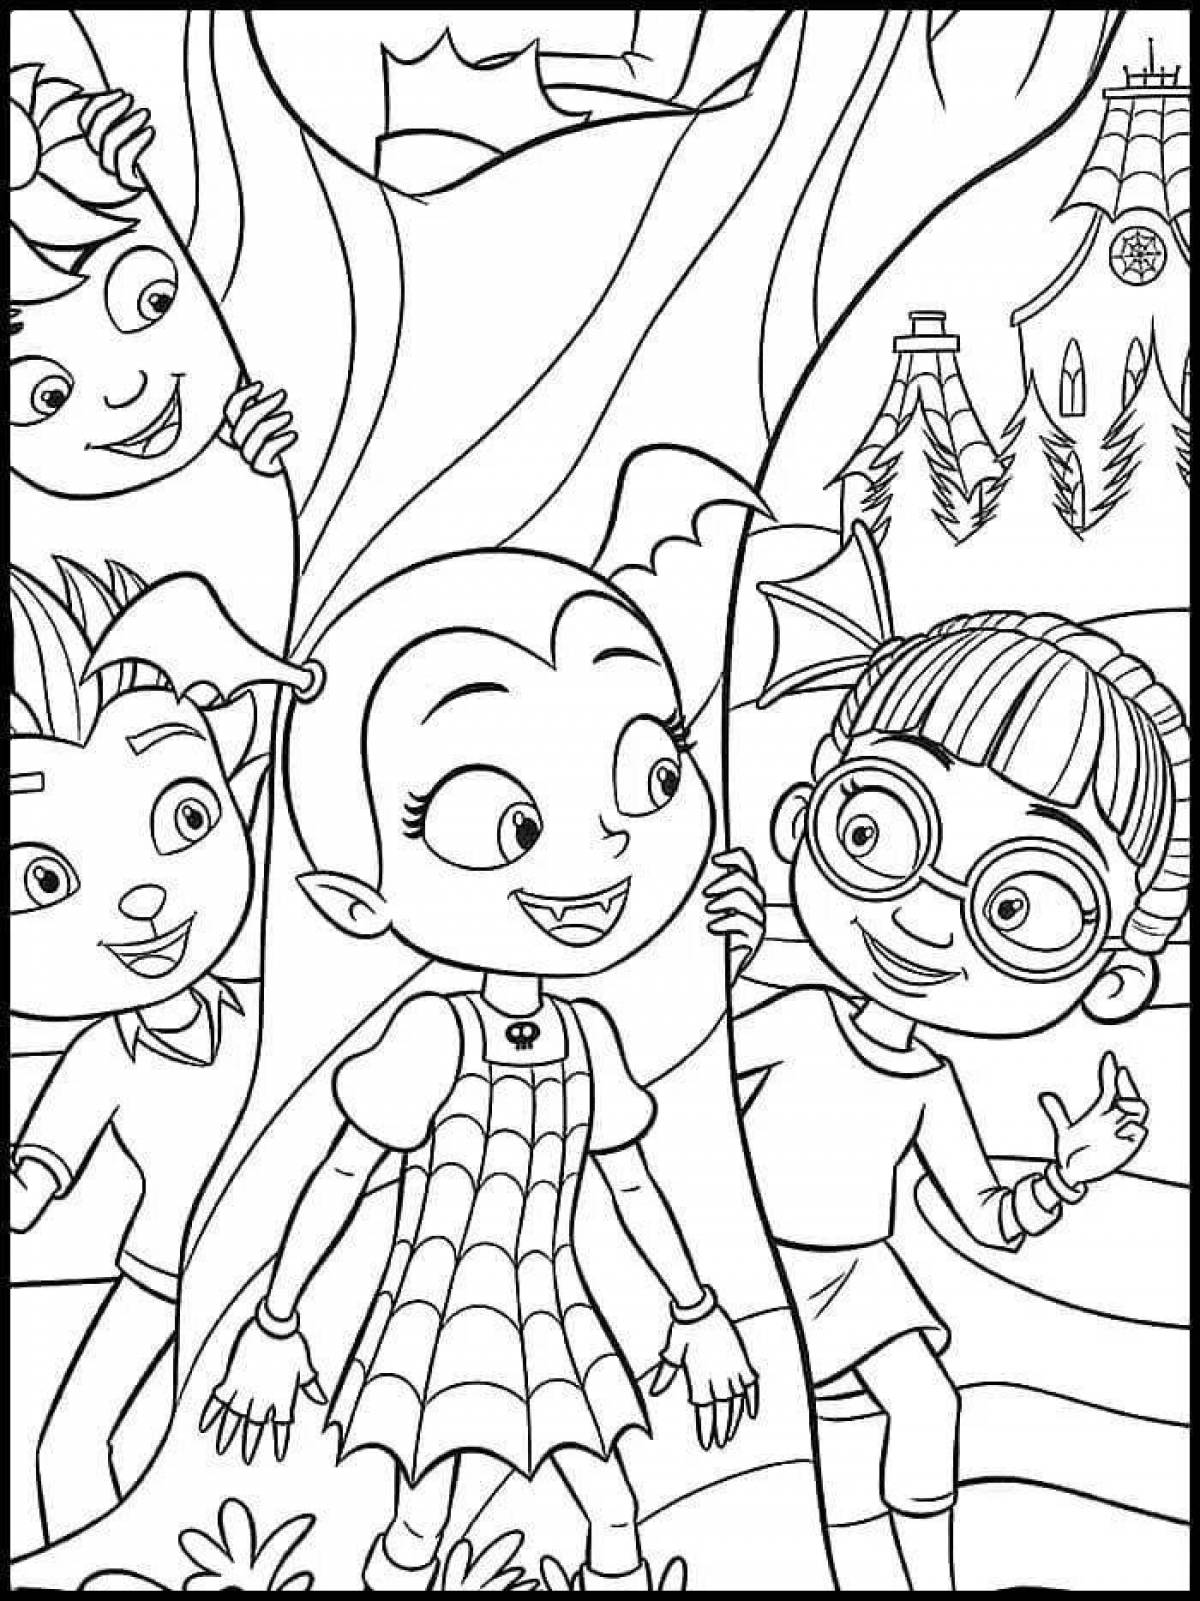 Fascinating amazing coloring page vee